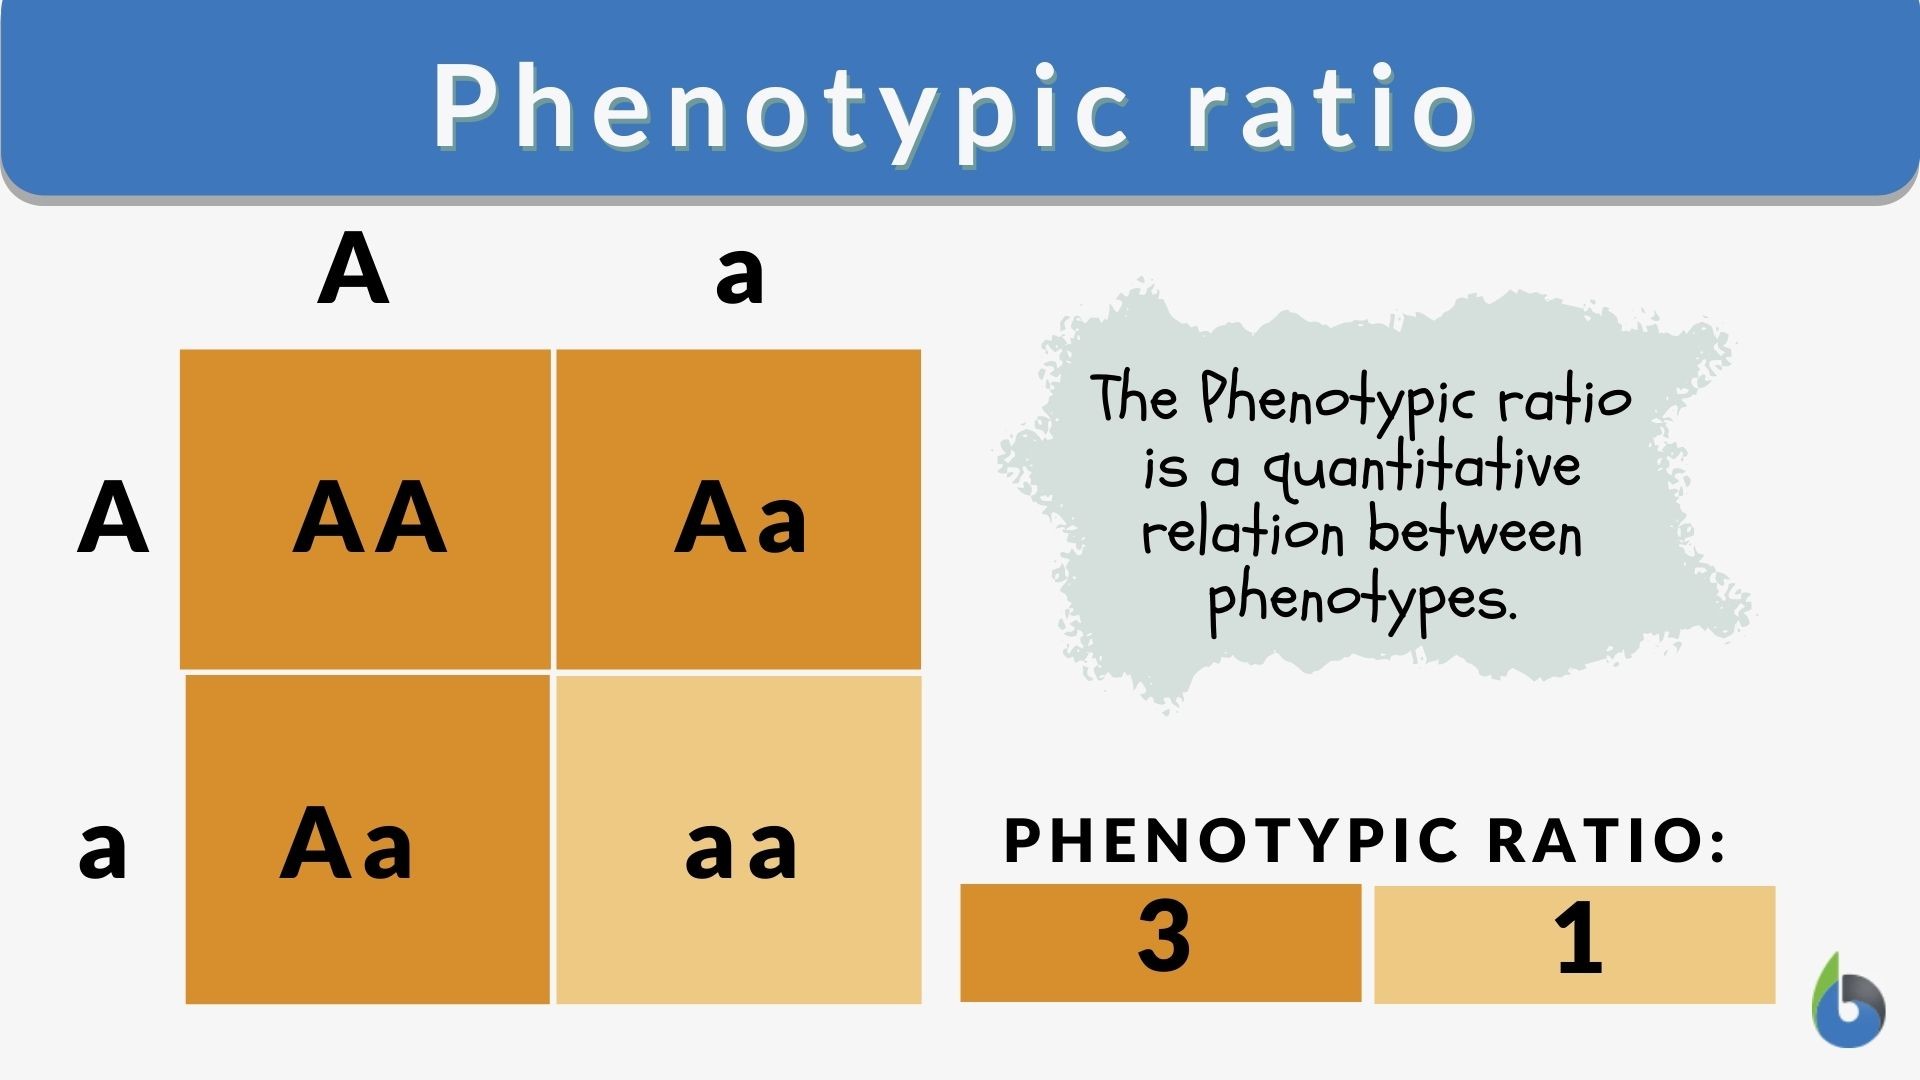 Phenotypic ratio - Definition and Examples - Biology Online Dictionary